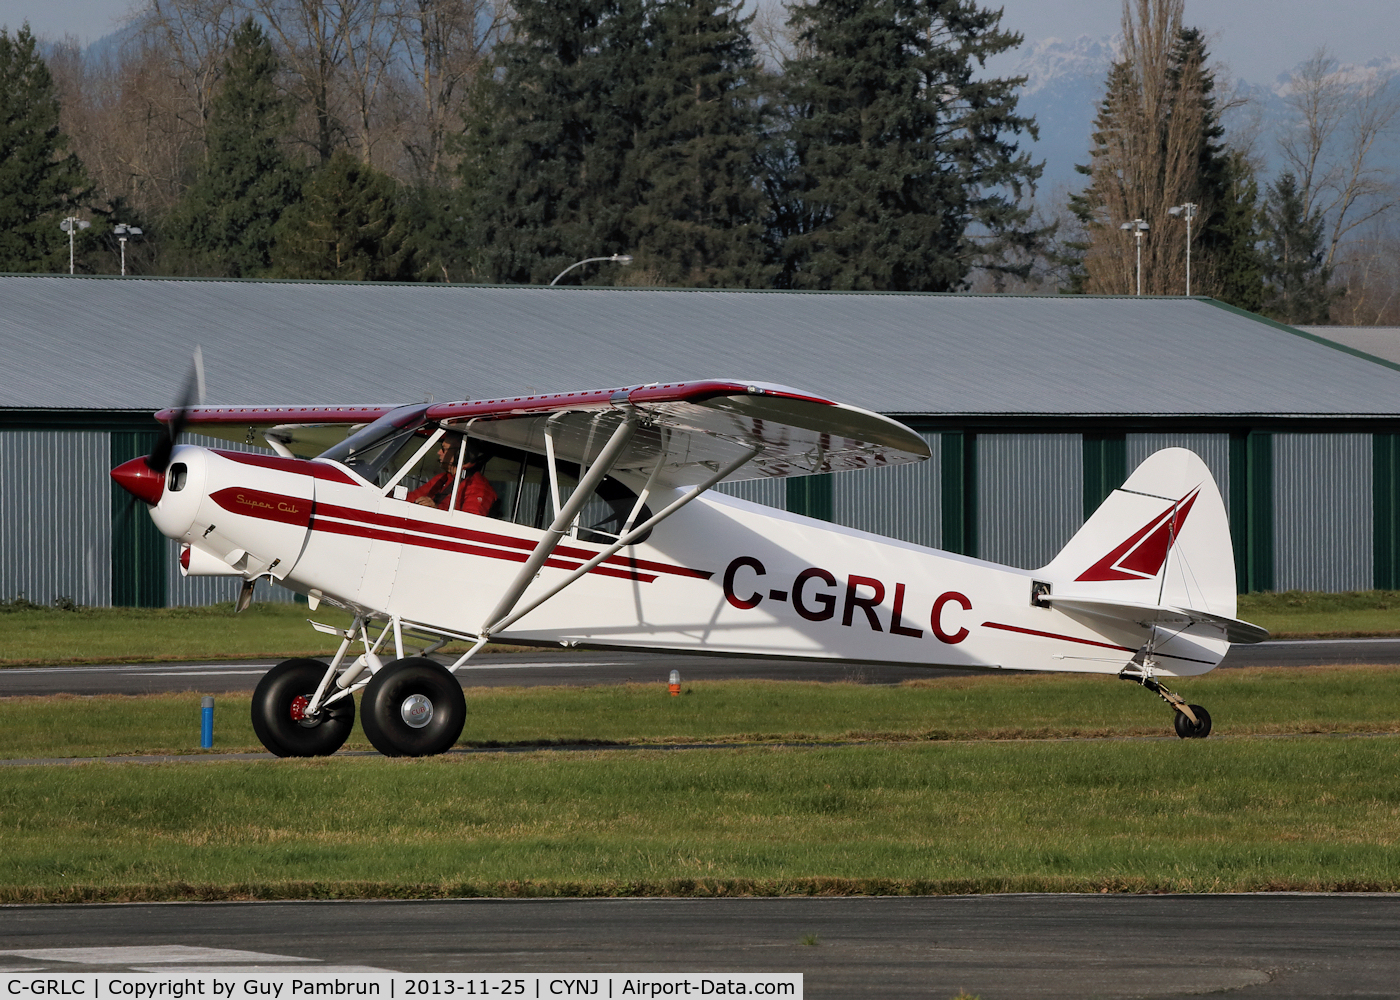 C-GRLC, 1954 Piper PA-18A-135 Super Cub C/N 18 3279, A comment from the owner...

